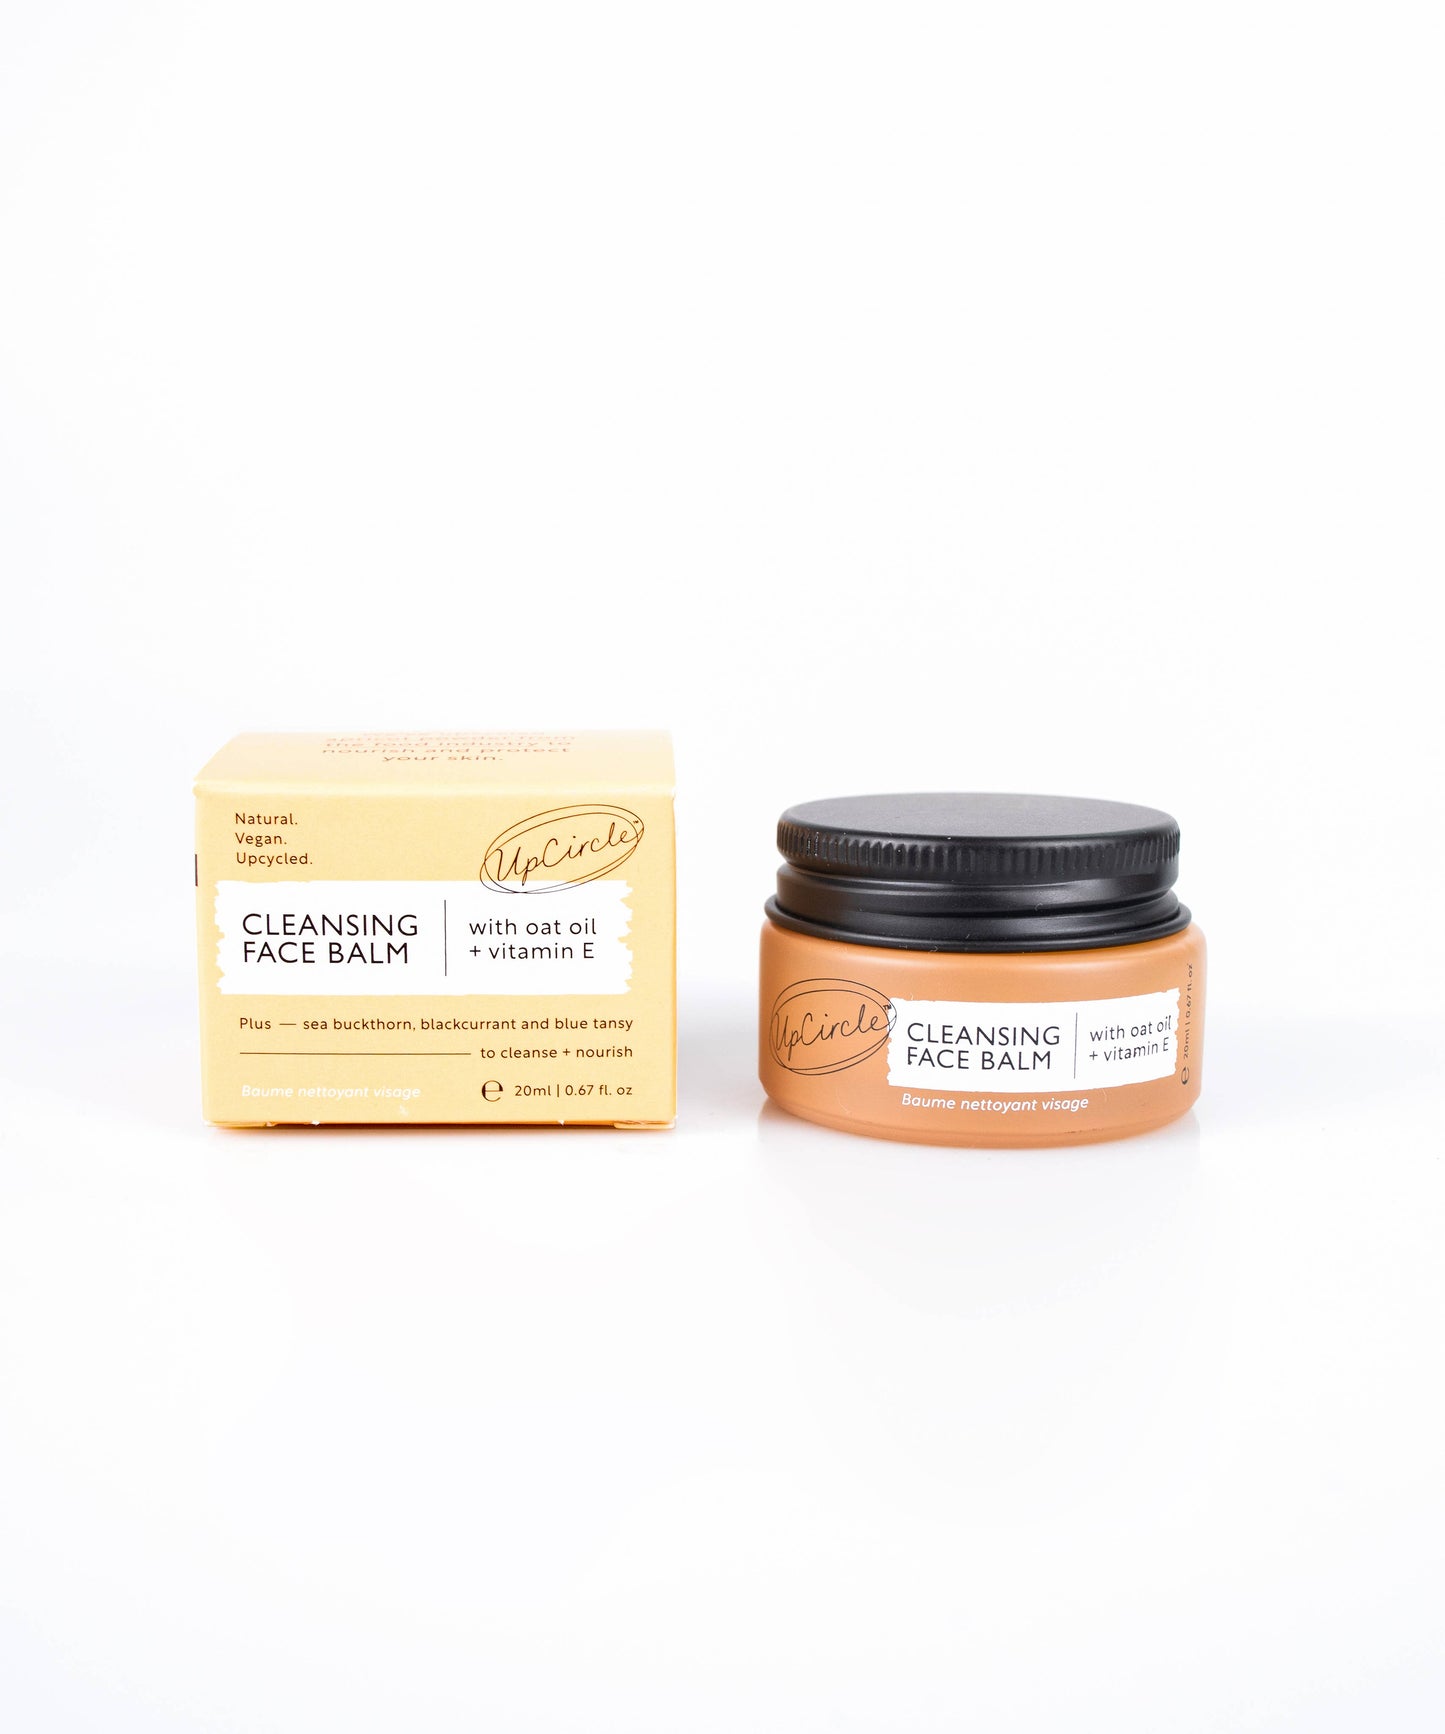 Cleansing Face Balm with Oat Oil + Vitamin E - Travel Size